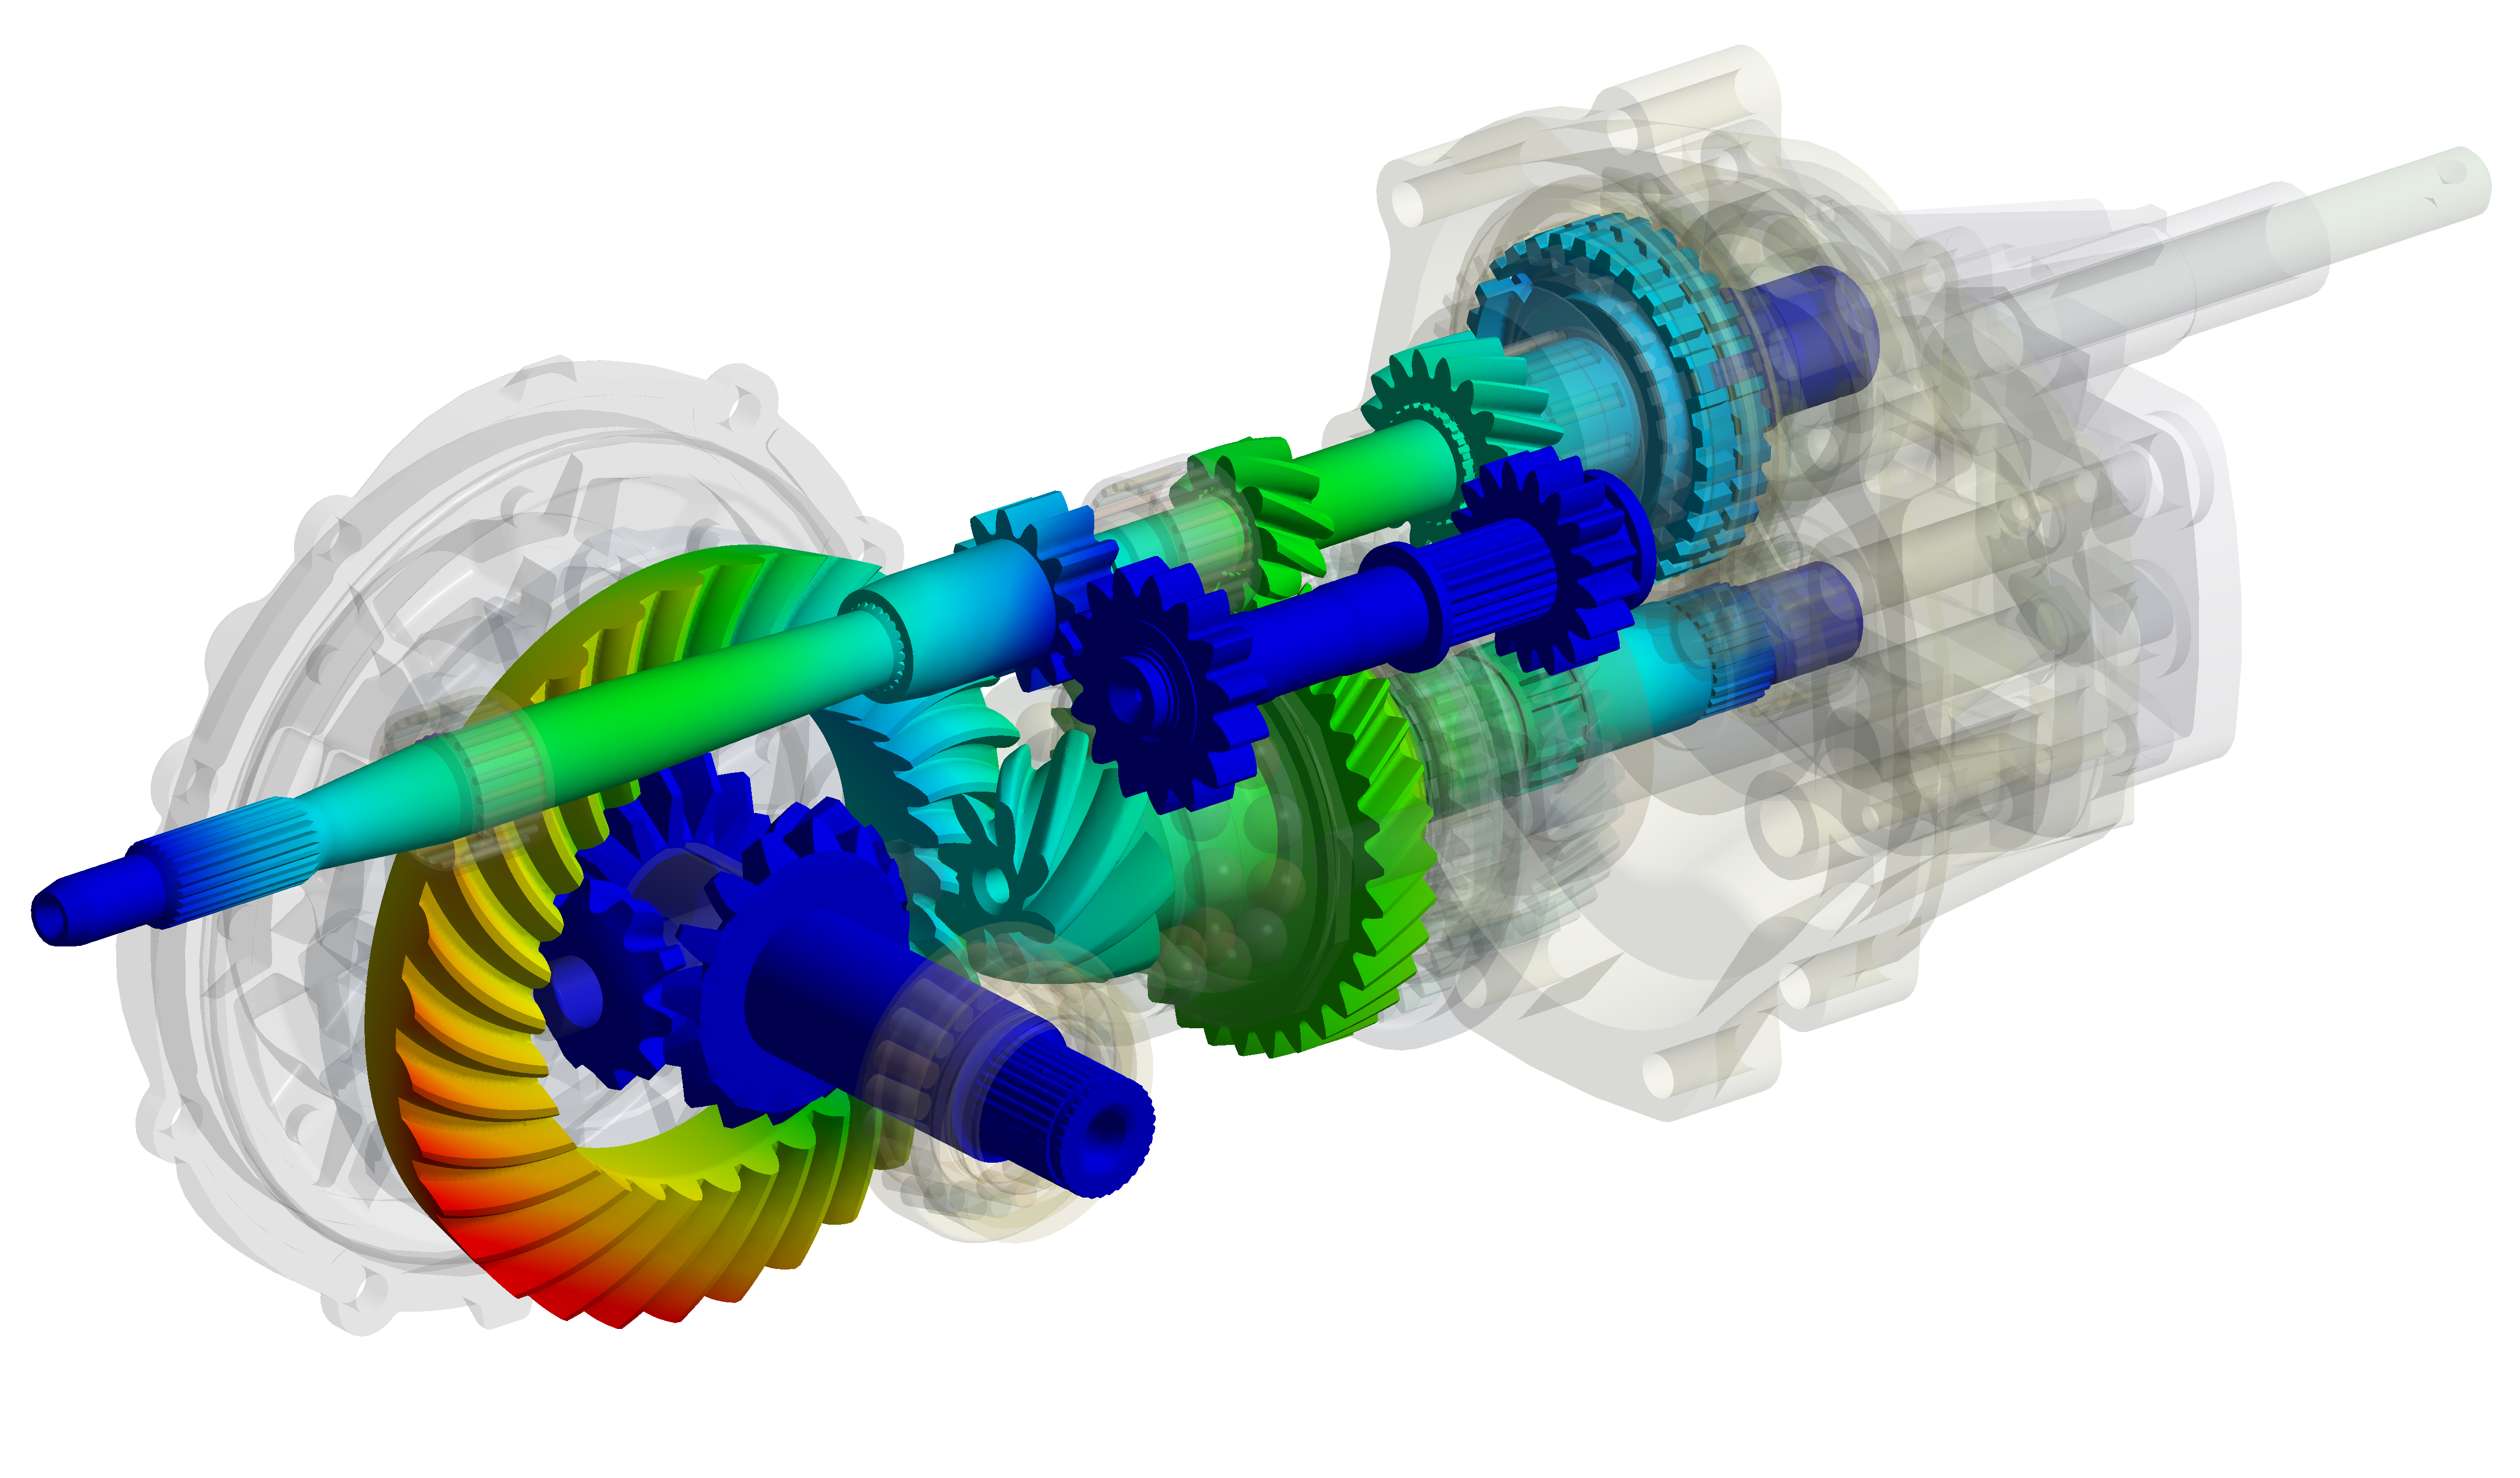 LS Dyna ANSYS